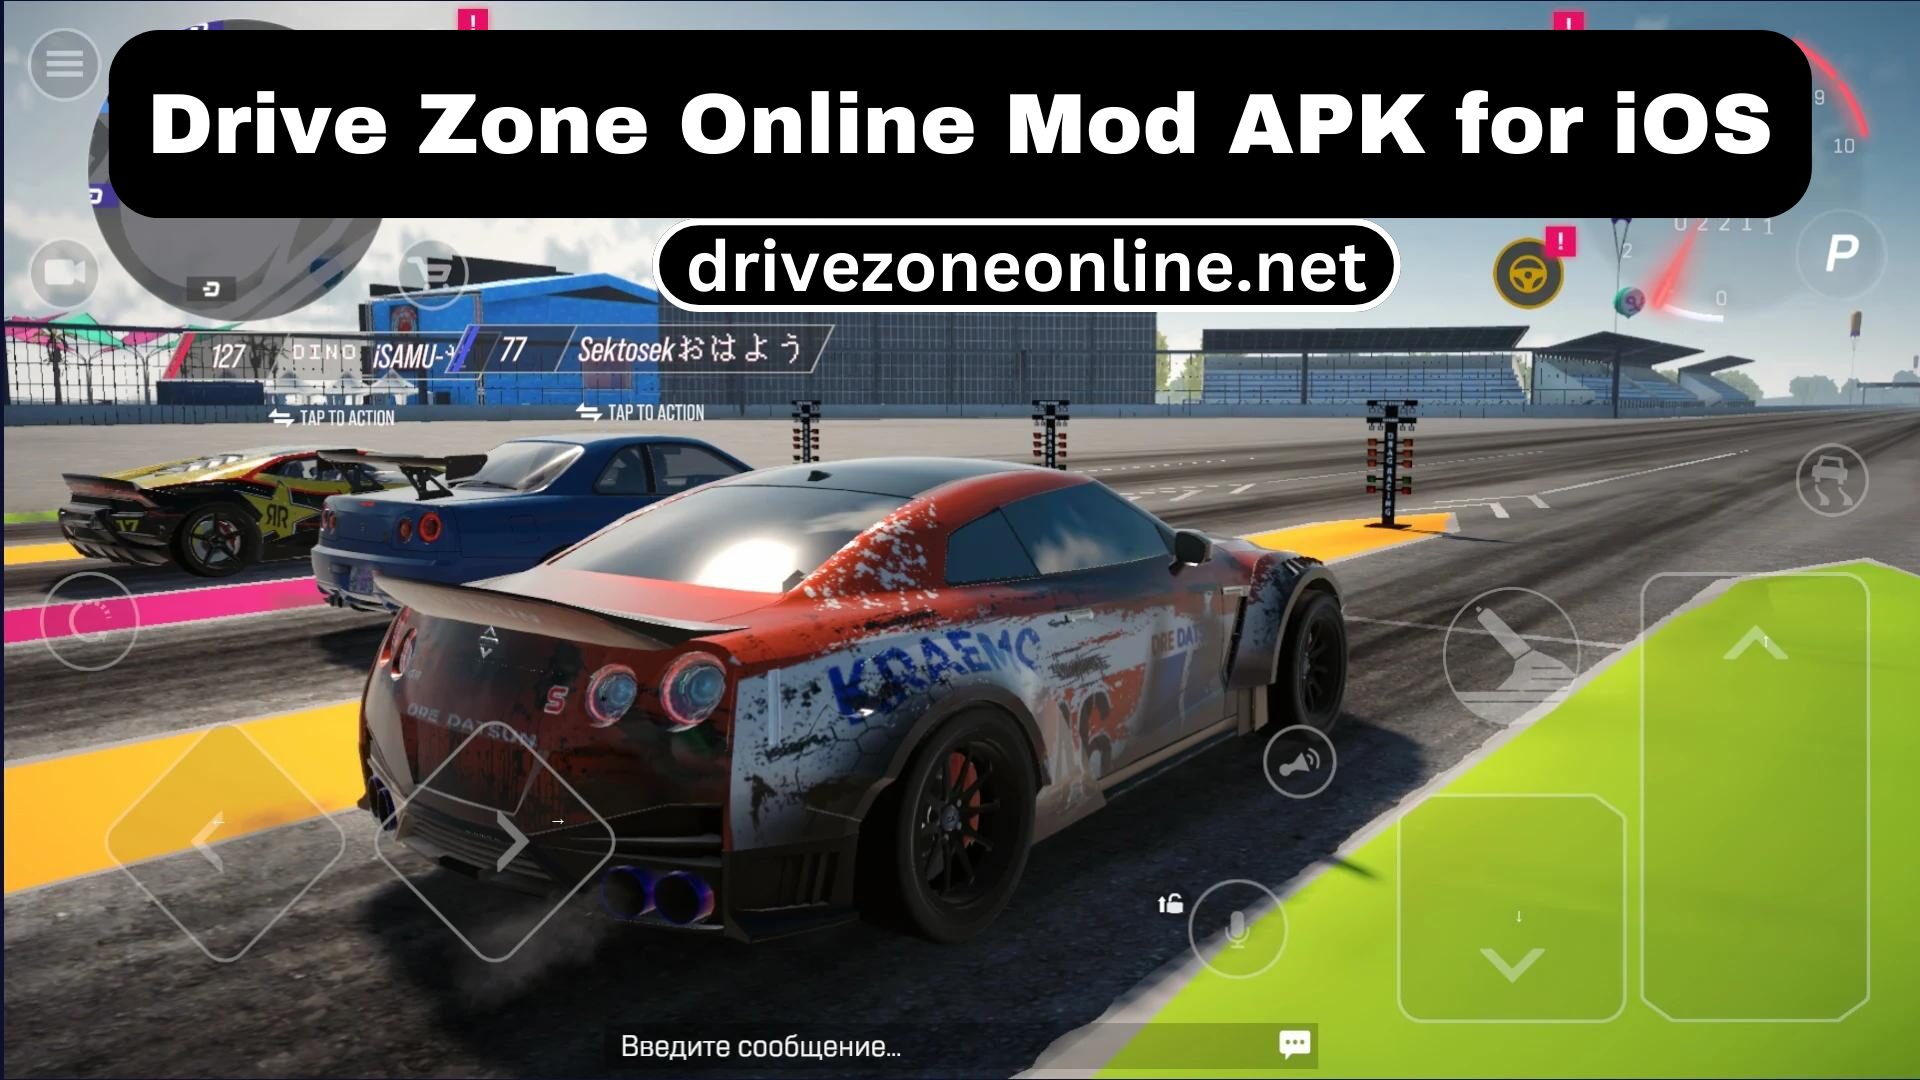 Drive Zone Online Mod APK for iOS